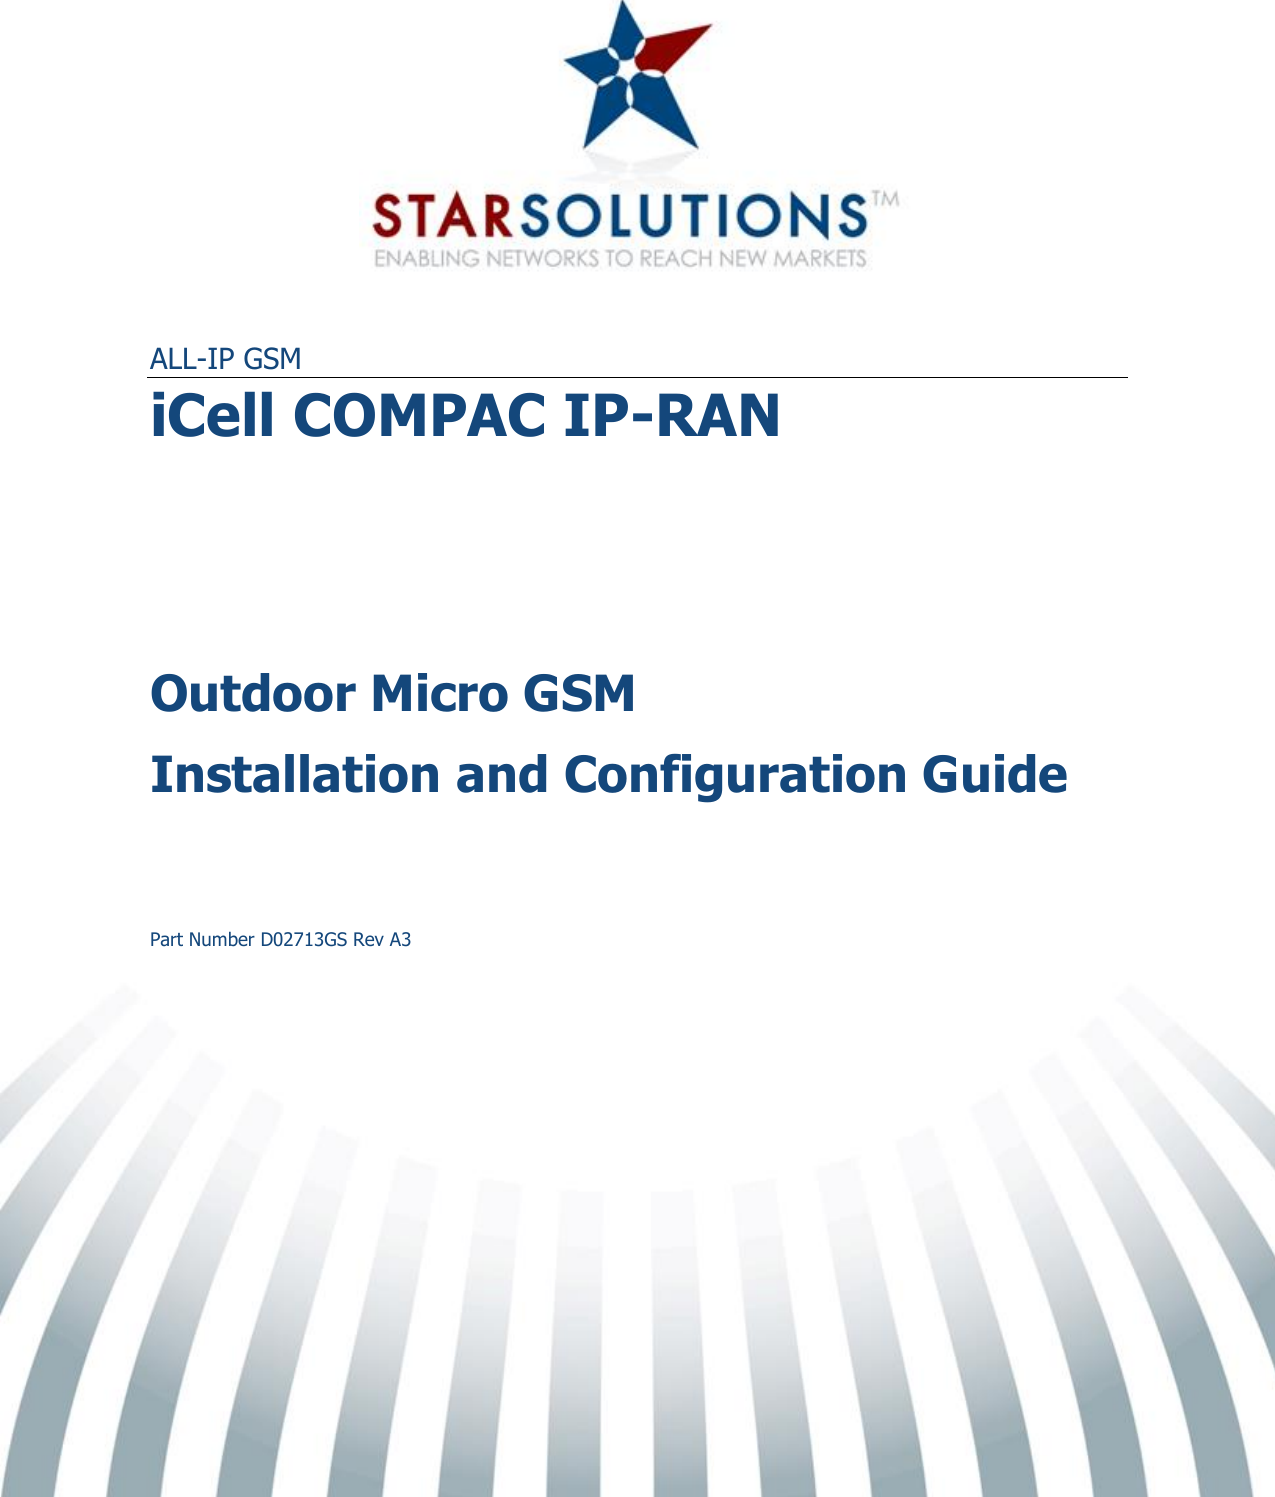    ALL-IP GSM iCell COMPAC IP-RAN Outdoor Micro GSM Installation and Configuration Guide Part Number D02713GS Rev A3 